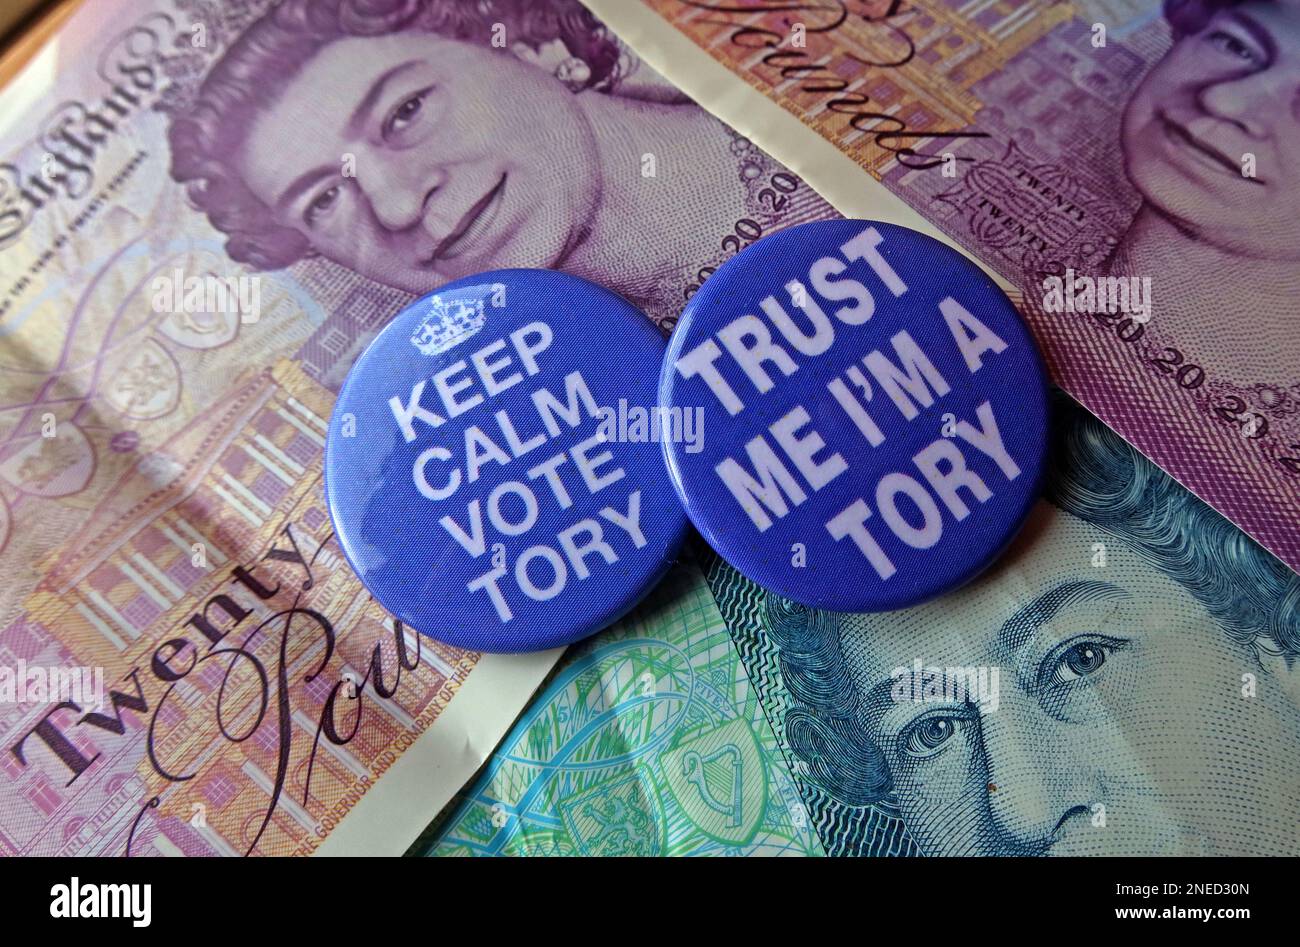 I'm a Tory - In England/Wales, will anyone still rely on voting Tory, based on economic/financial track record? Stock Photo